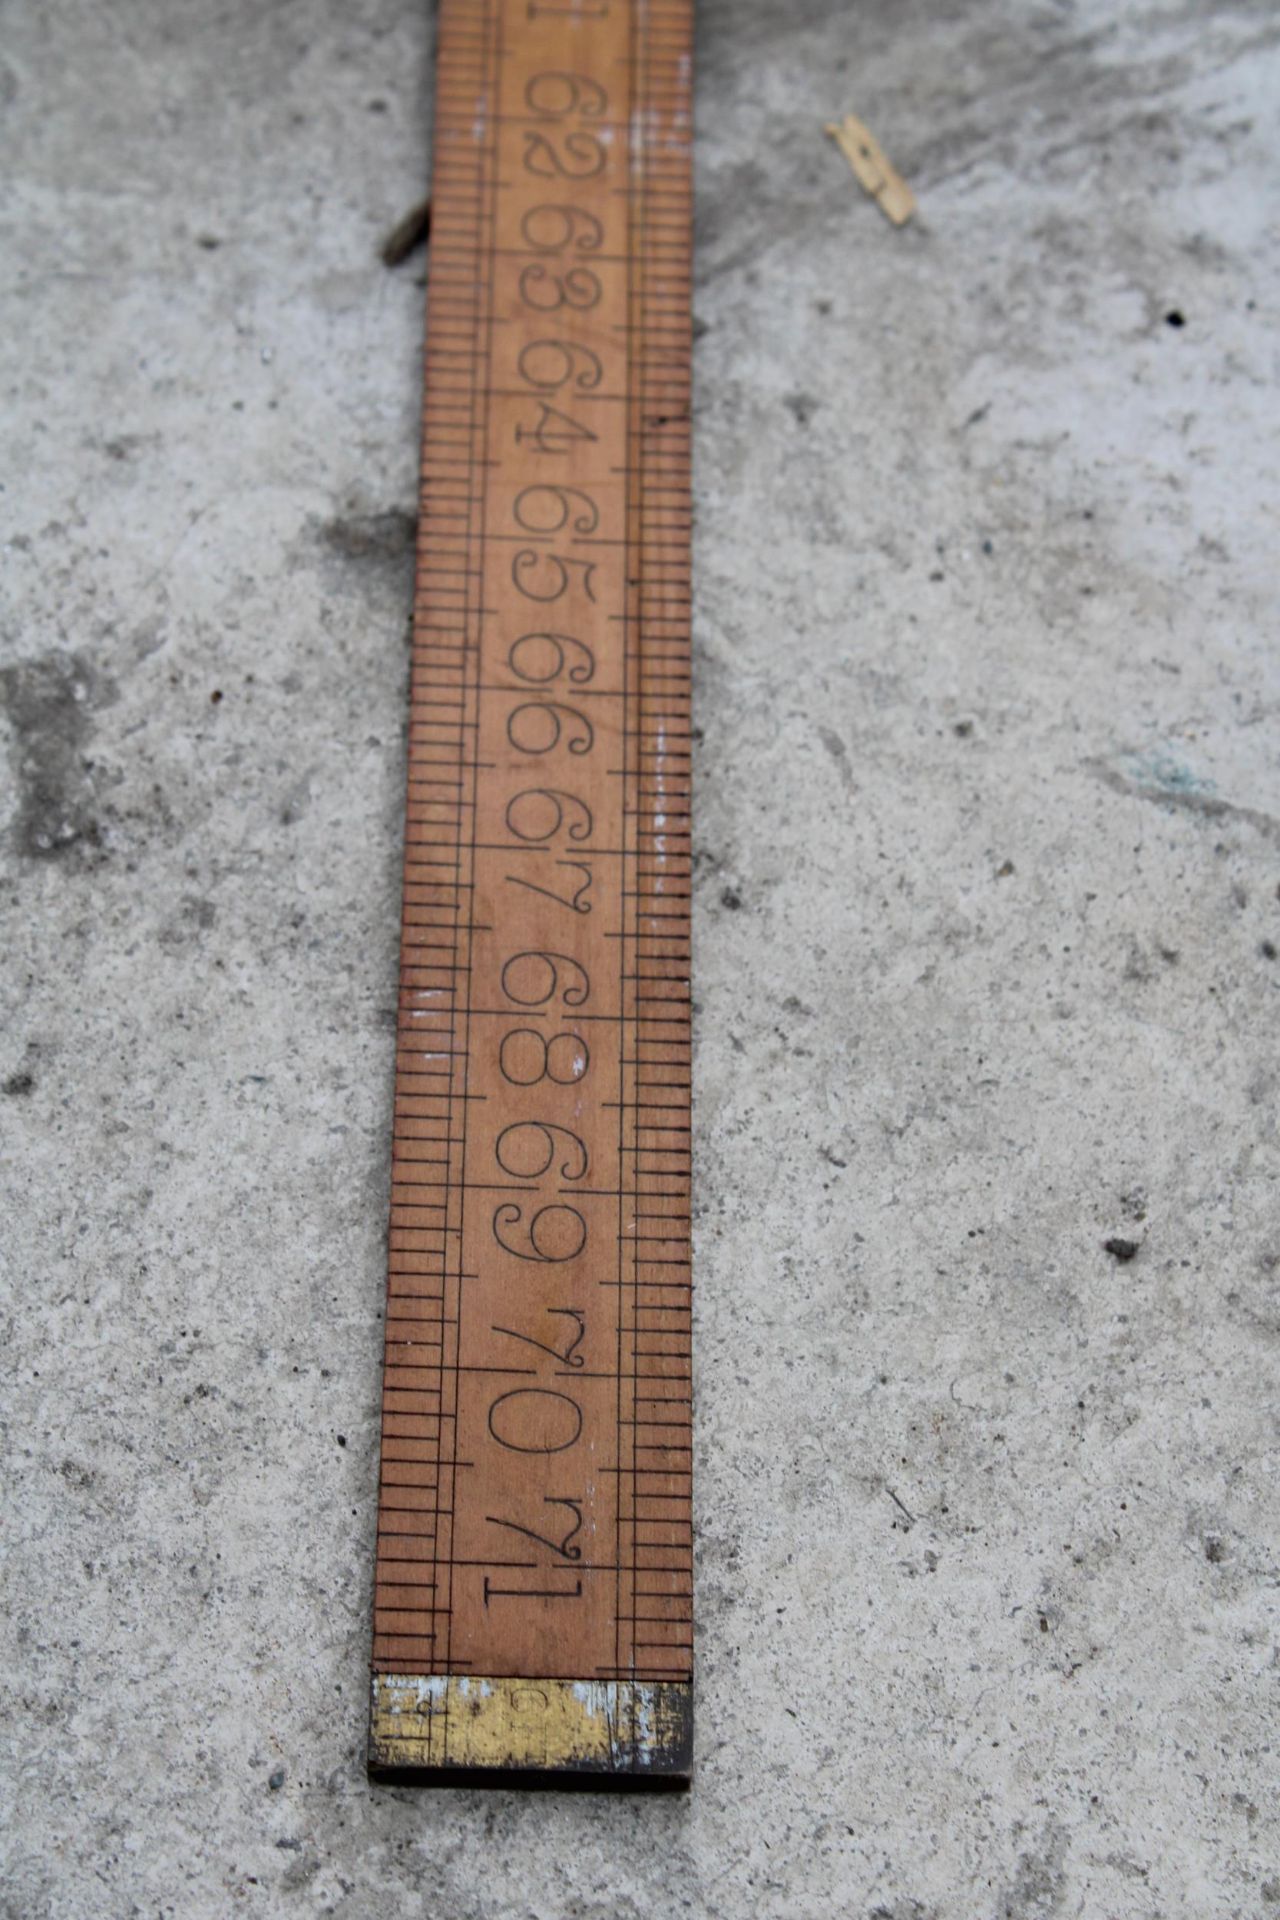 A 71" WOODEN RULER - Image 3 of 3